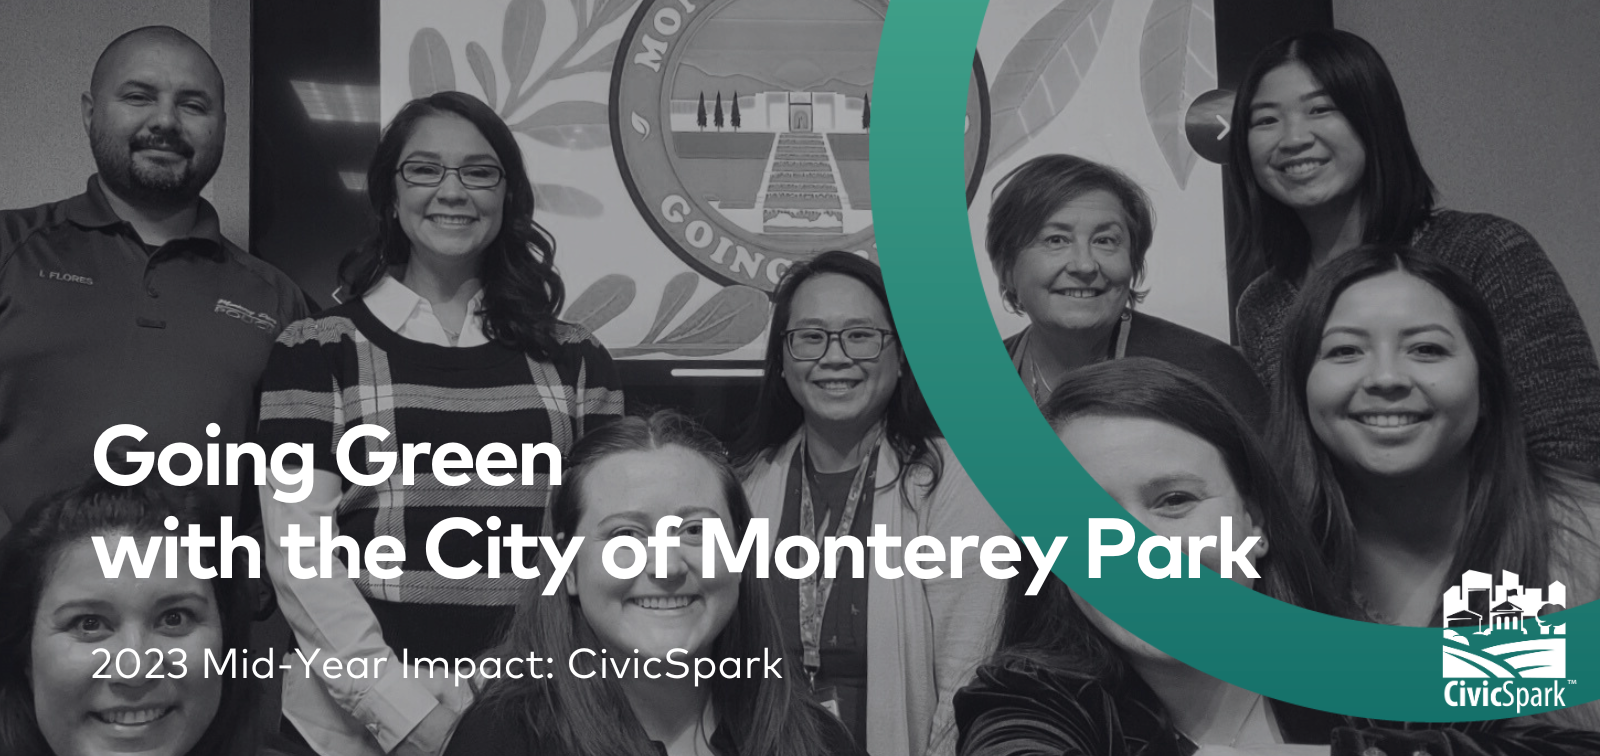 Going Green with the City of Monterey Park - CivicSpark 2023 Mid-year Impact